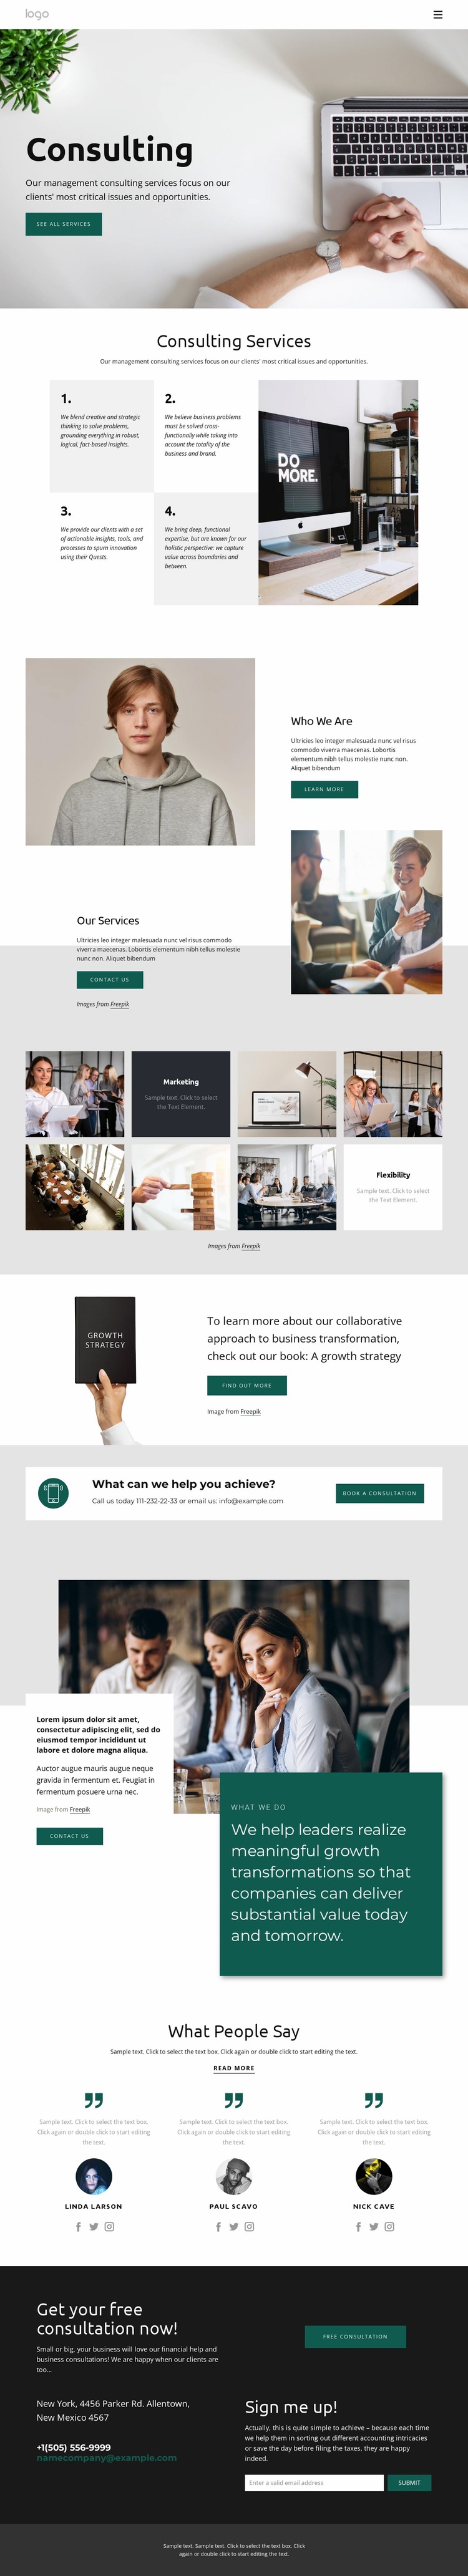 Business consultant company Website Builder Templates